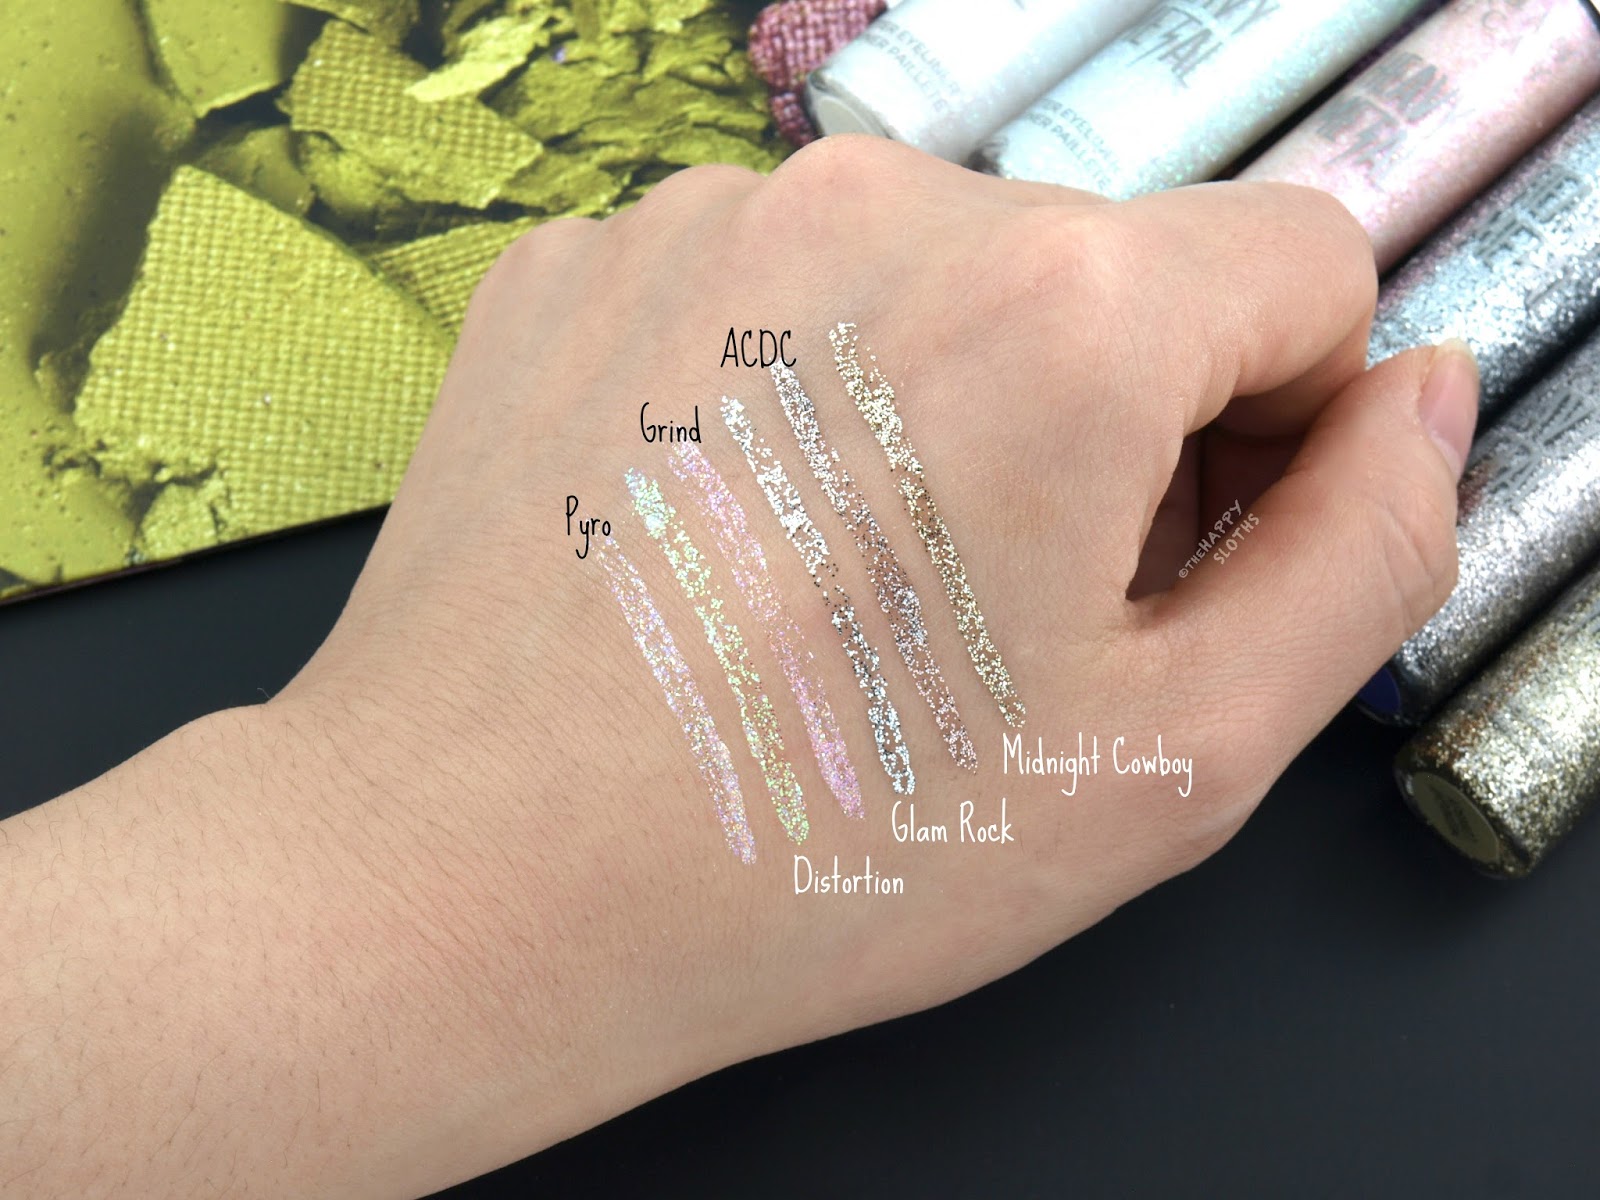 Urban Decay Heavy Metal Glitter Eyeliner: Review and Swatches | The Happy and Skincare Blog with Reviews Swatches